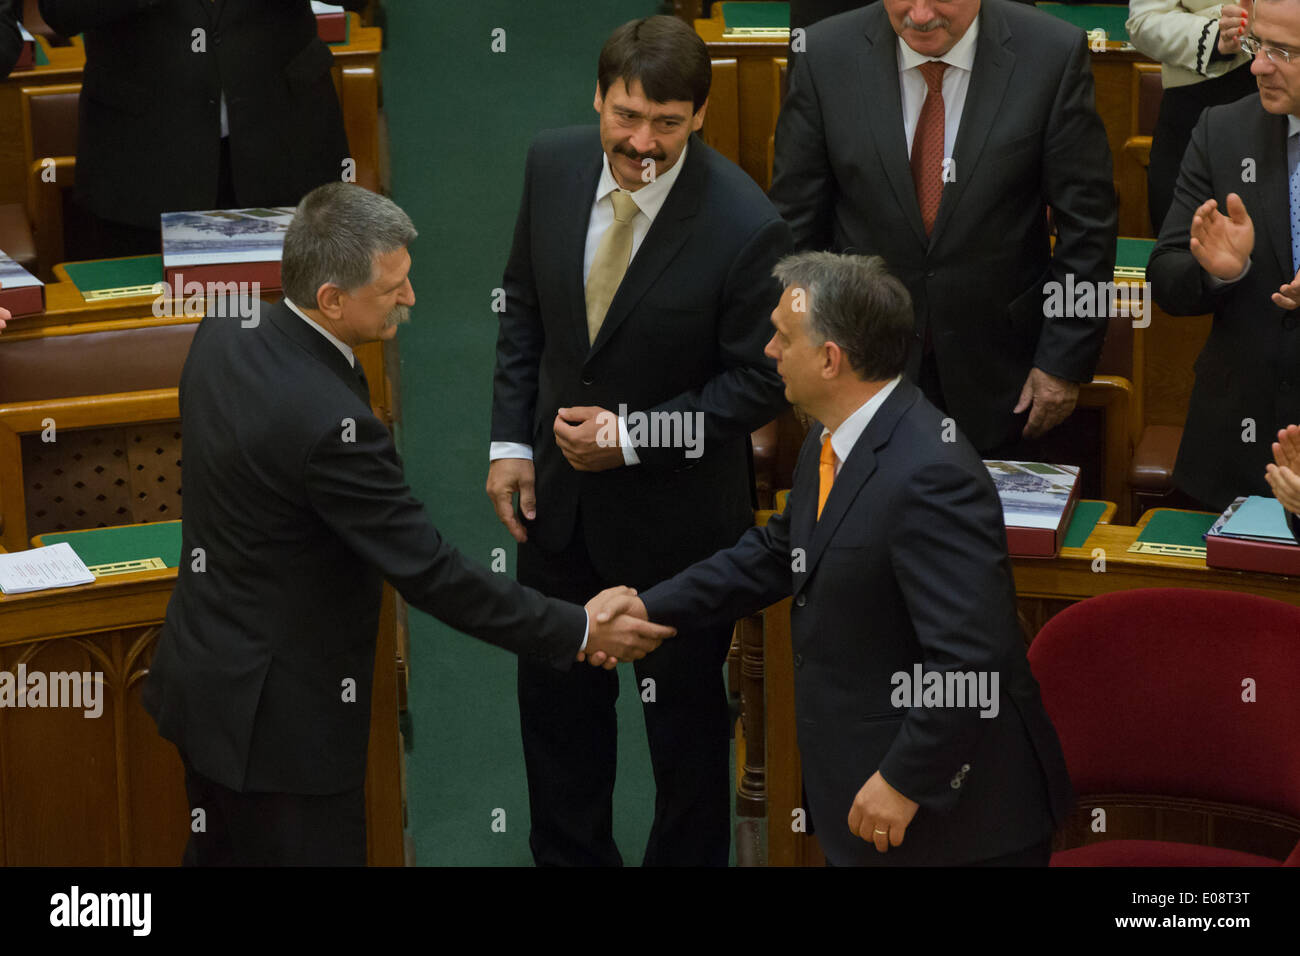 Budapest, Hungary. 6th May, 2014. Hungarian President Janos Ader (C) and Prime Minister Viktor Orban (R) congratulate Laszlo Kover (L), the reelected speaker of new Hungarian Parliament during the foundation session of the new Parliament, in Budapest, Hungary, on May 6, 2014. © Attila Volgyi/Xinhua/Alamy Live News Stock Photo